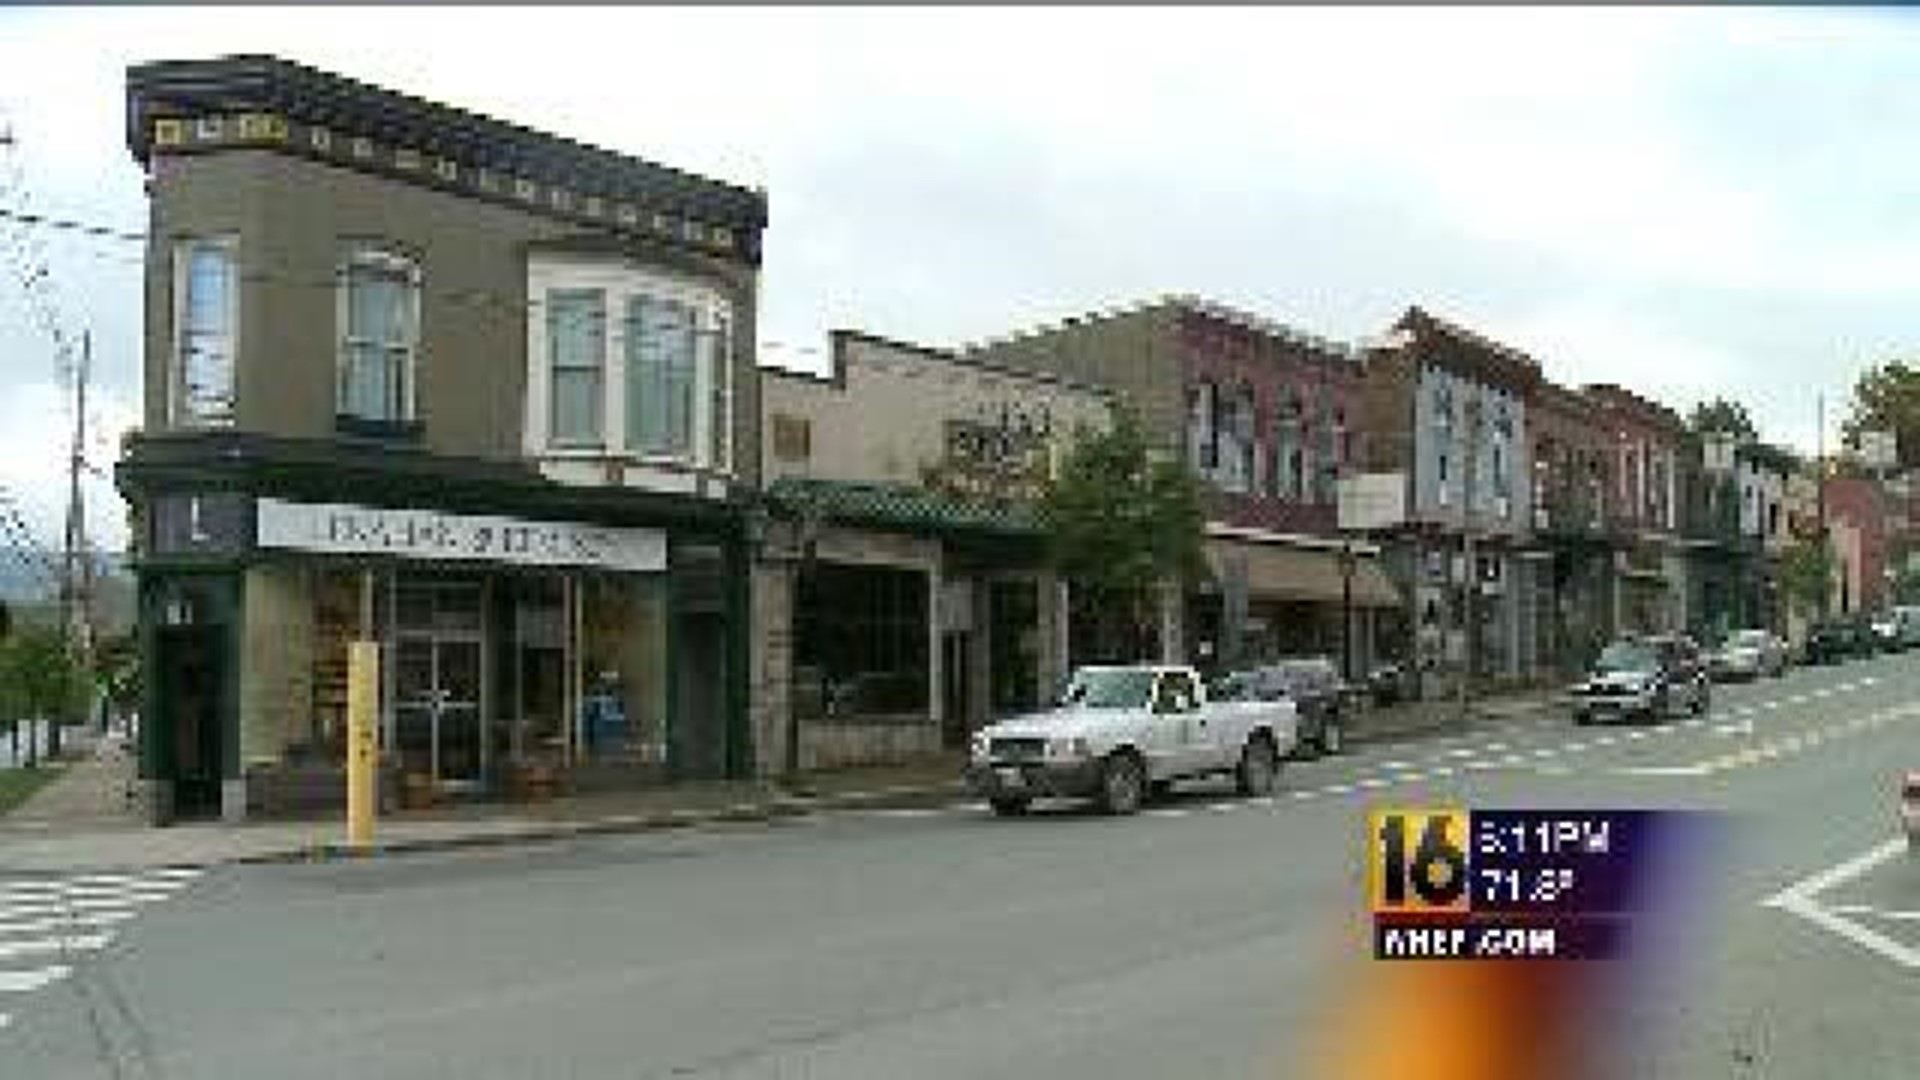 Changes in the Heart of Tunkhannock